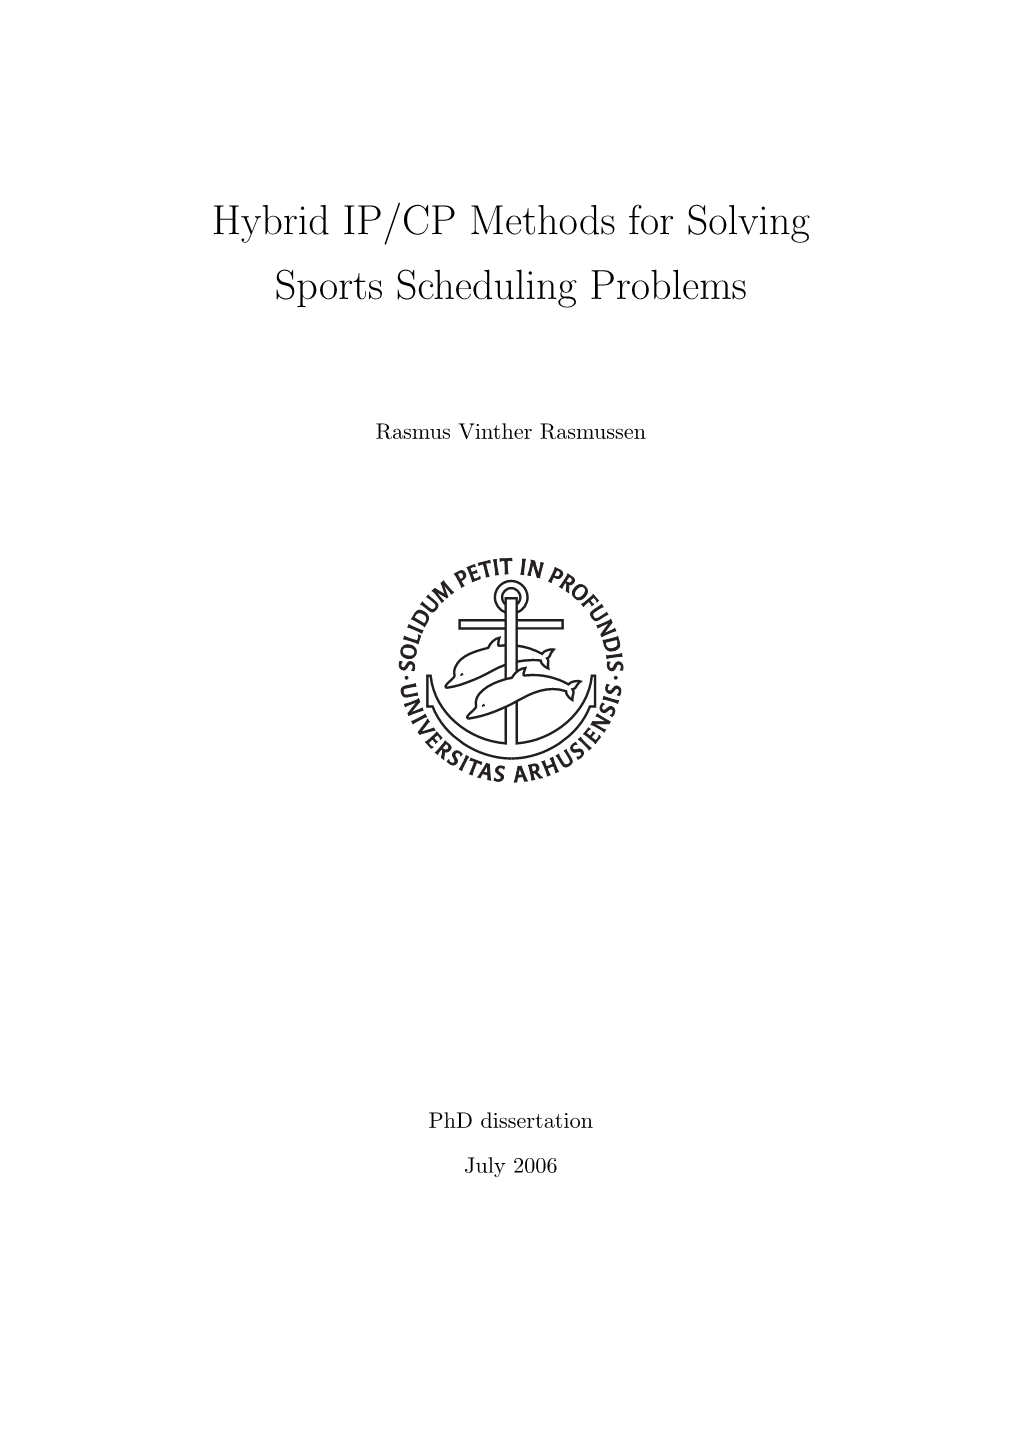 Hybrid IP/CP Methods for Solving Sports Scheduling Problems